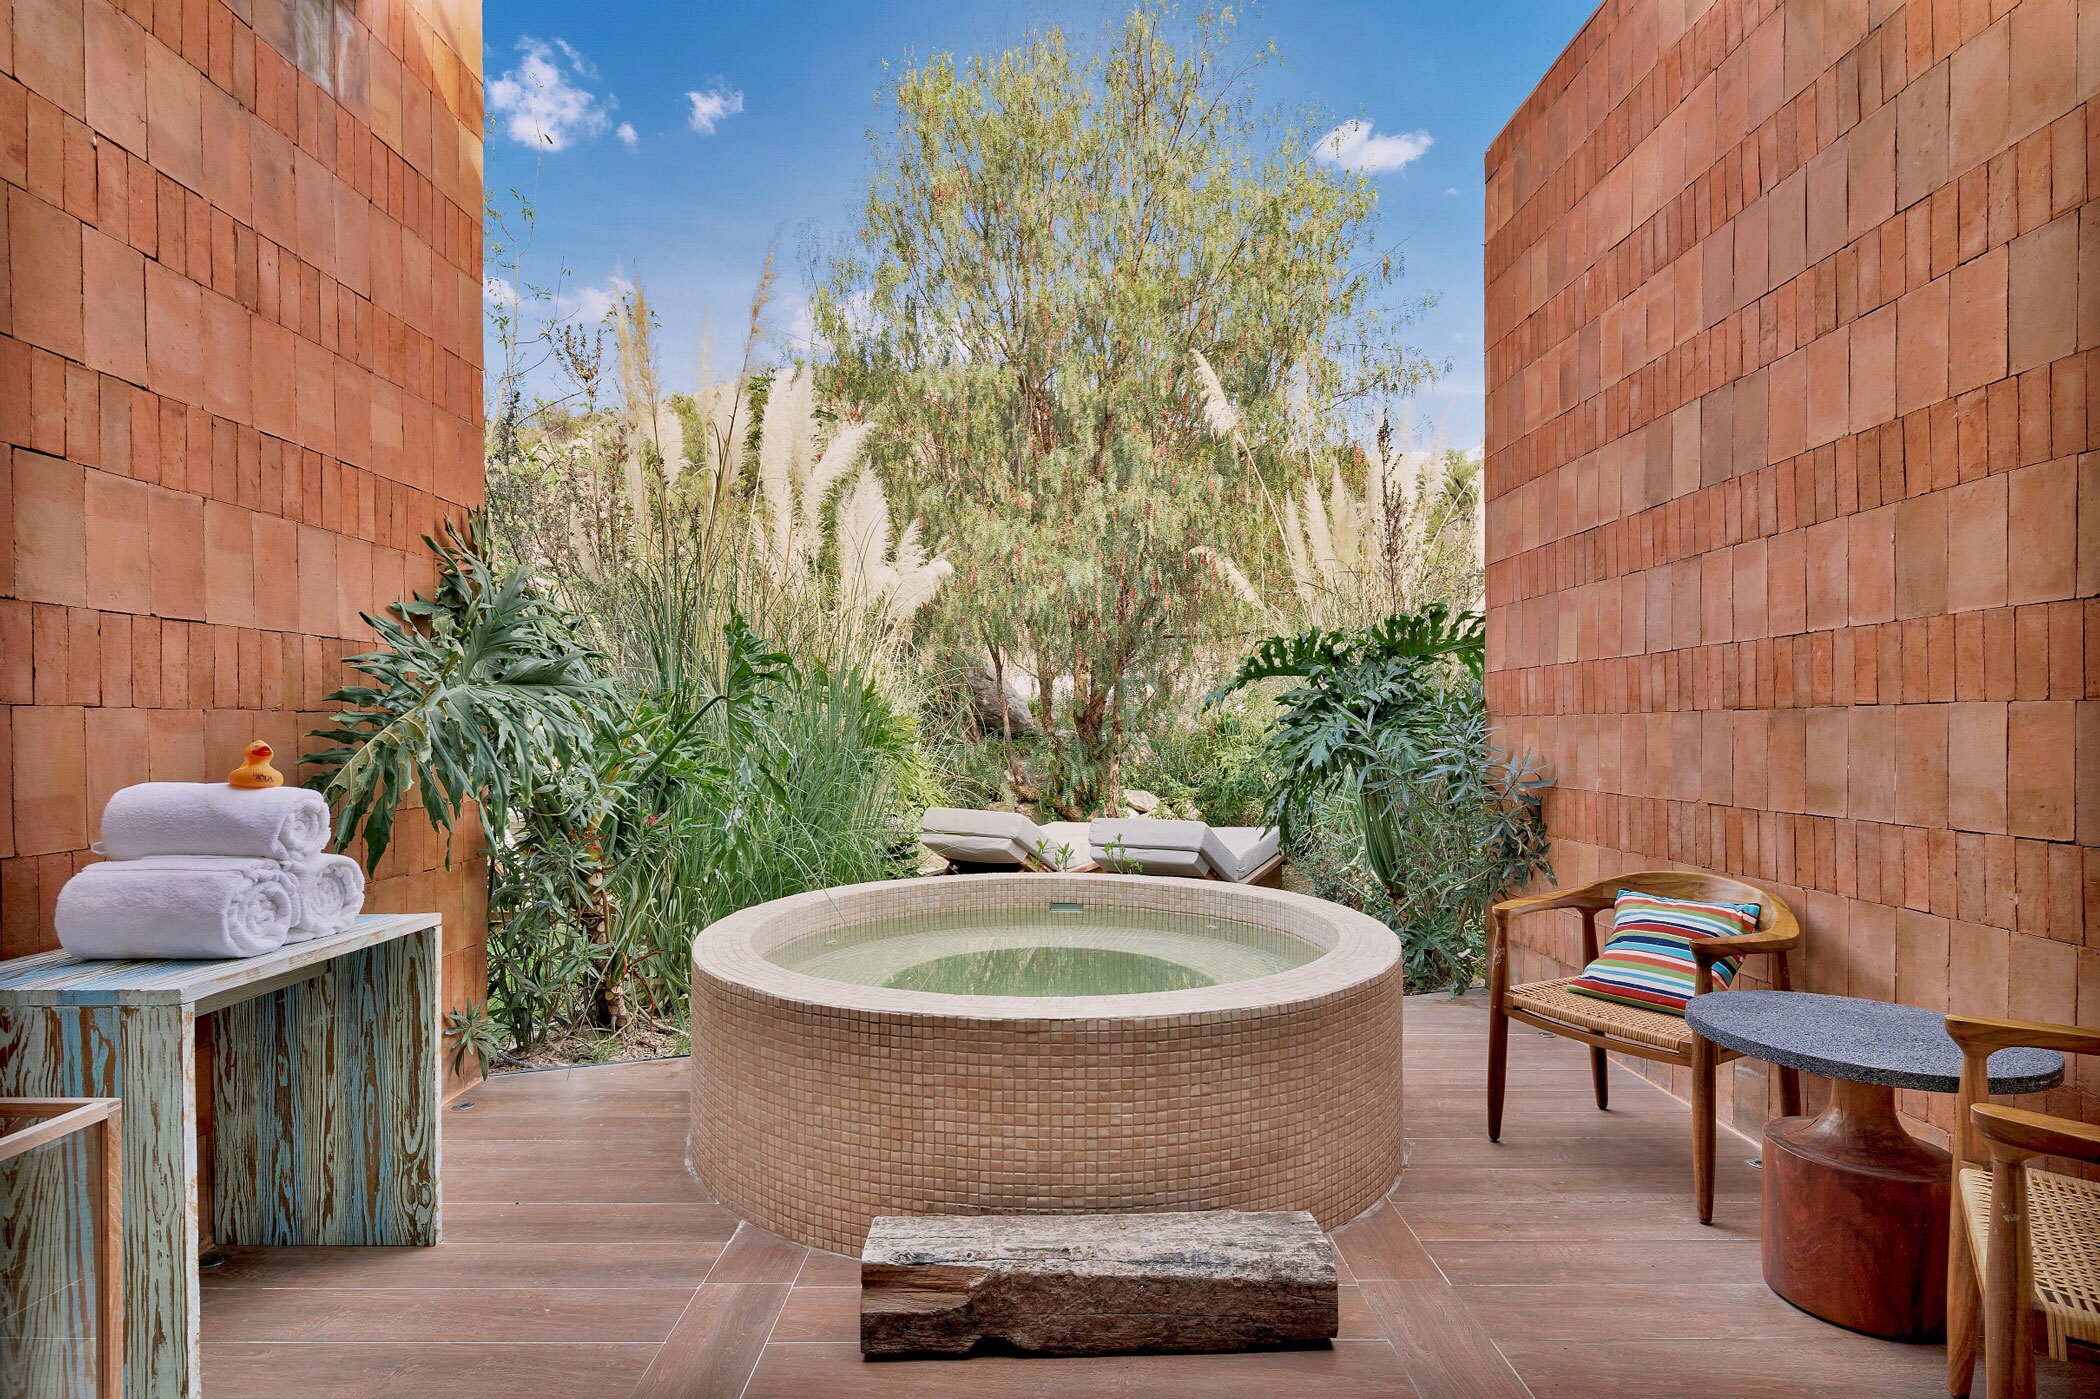 Mexico City-based real estate investment trust FibraHotel owns the Live Aqua San Miguel de Allende in the central Mexican state of Guanajuato. (FibraHotel)